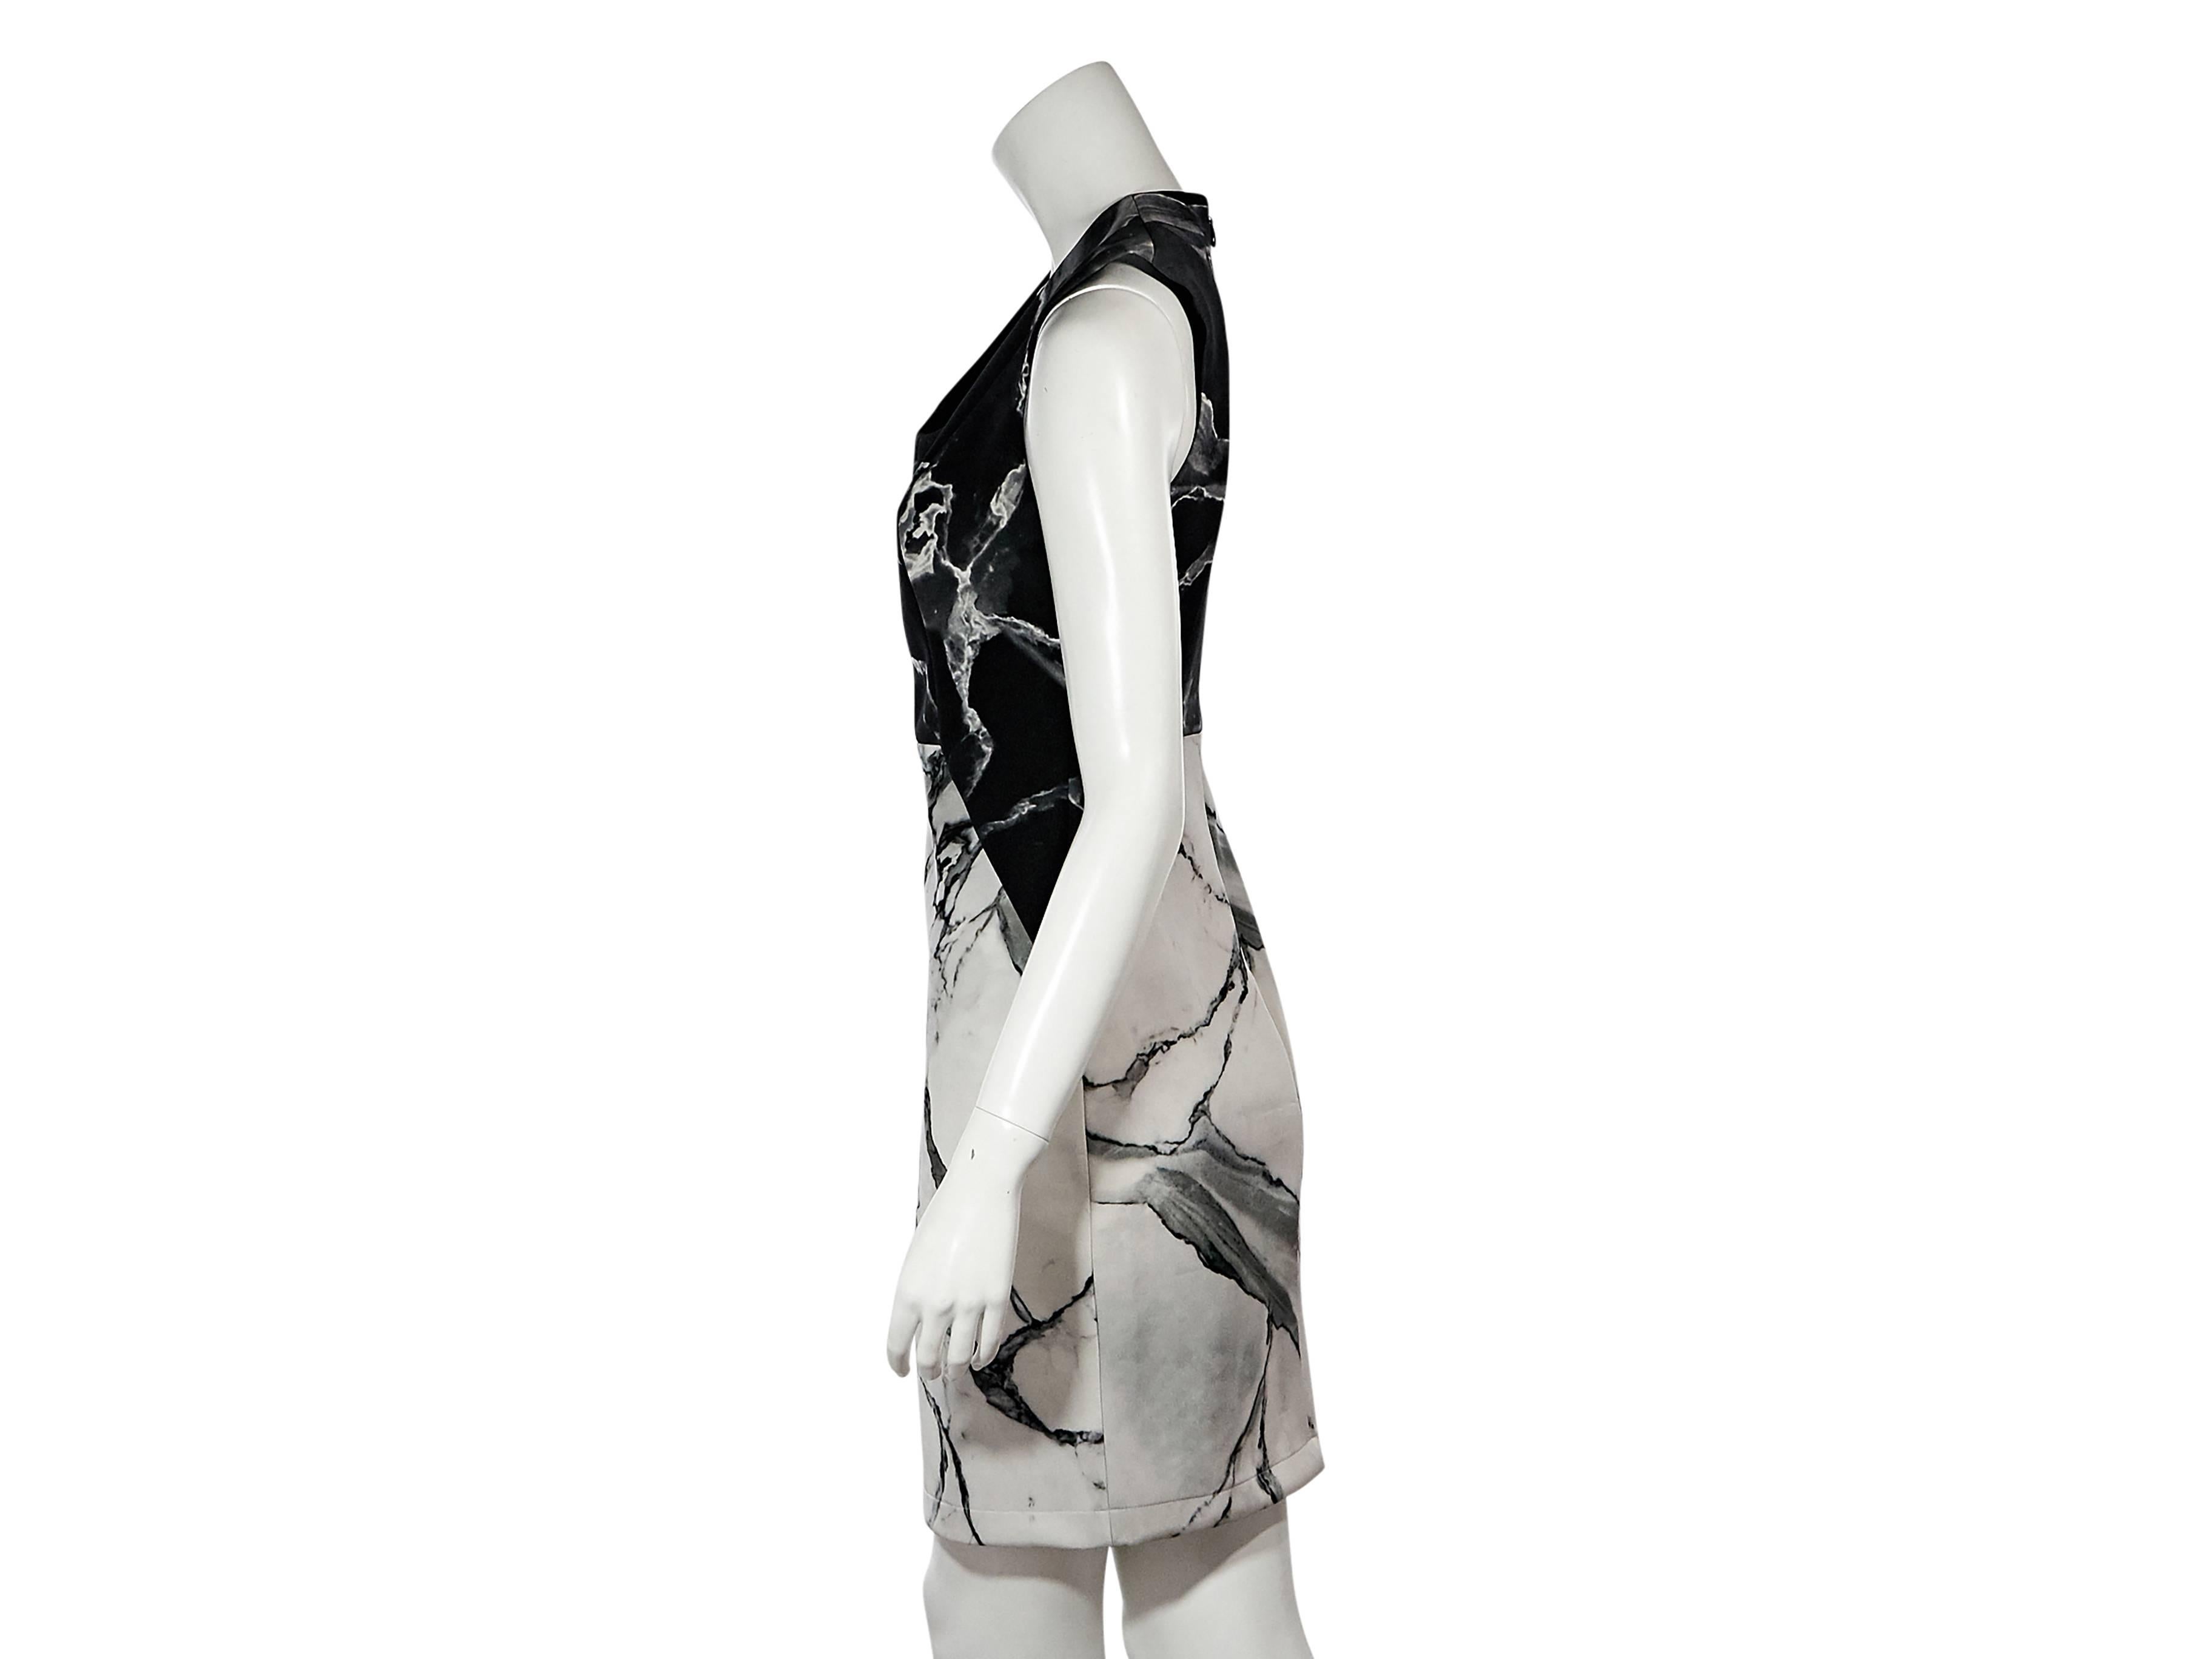 Product details: Black and white marble-printed silk sheath dress by Robert Rodriguez. Flattering design. U-neck. Sleeveless. Concealed back zip closure. 
Condition: Very good. 
Est. Retail $ 370.00